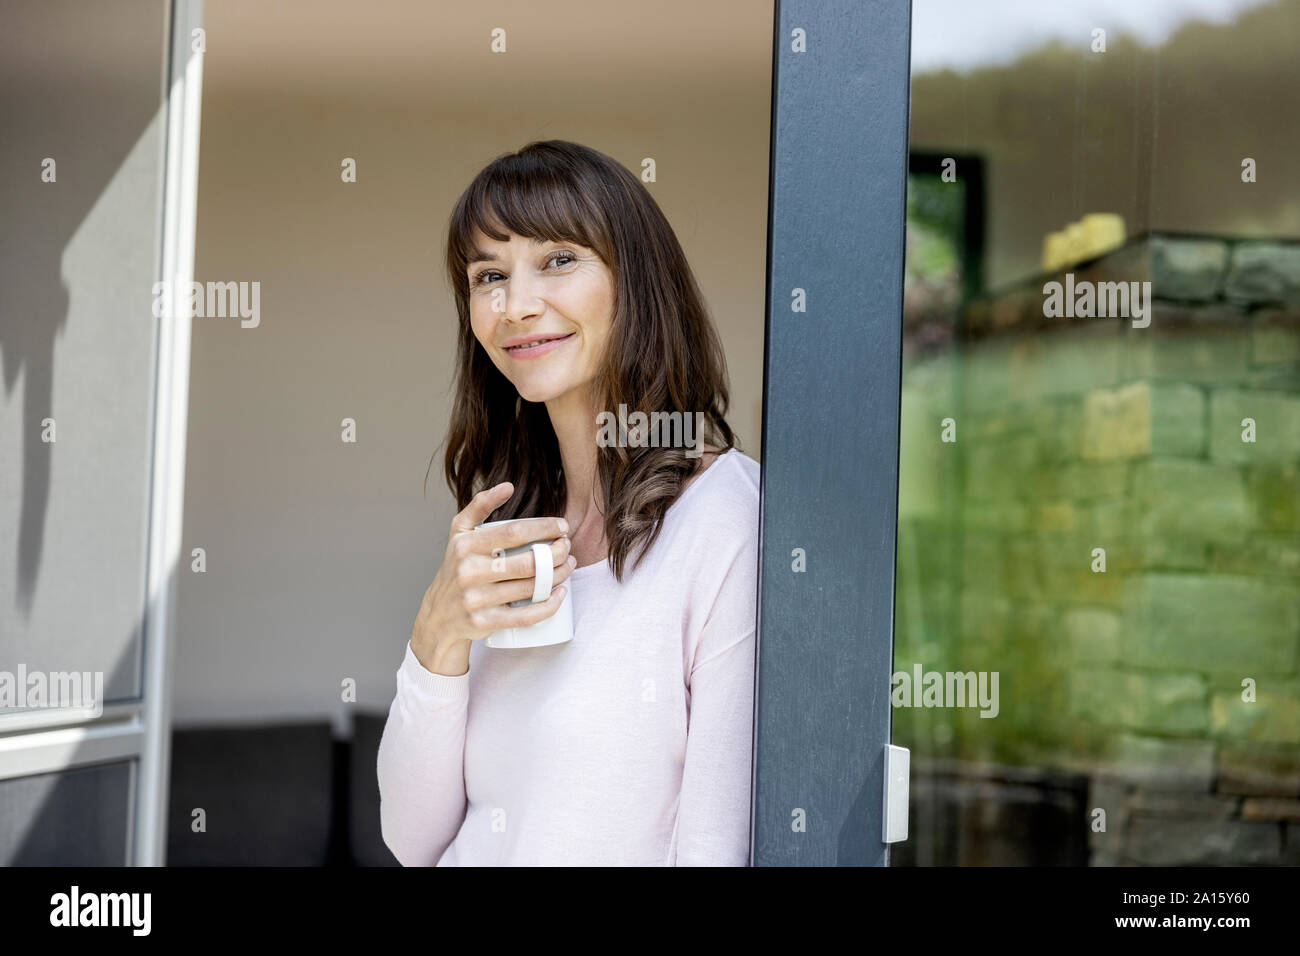 Portrait of smiling woman holding cup of coffee at home Stock Photo